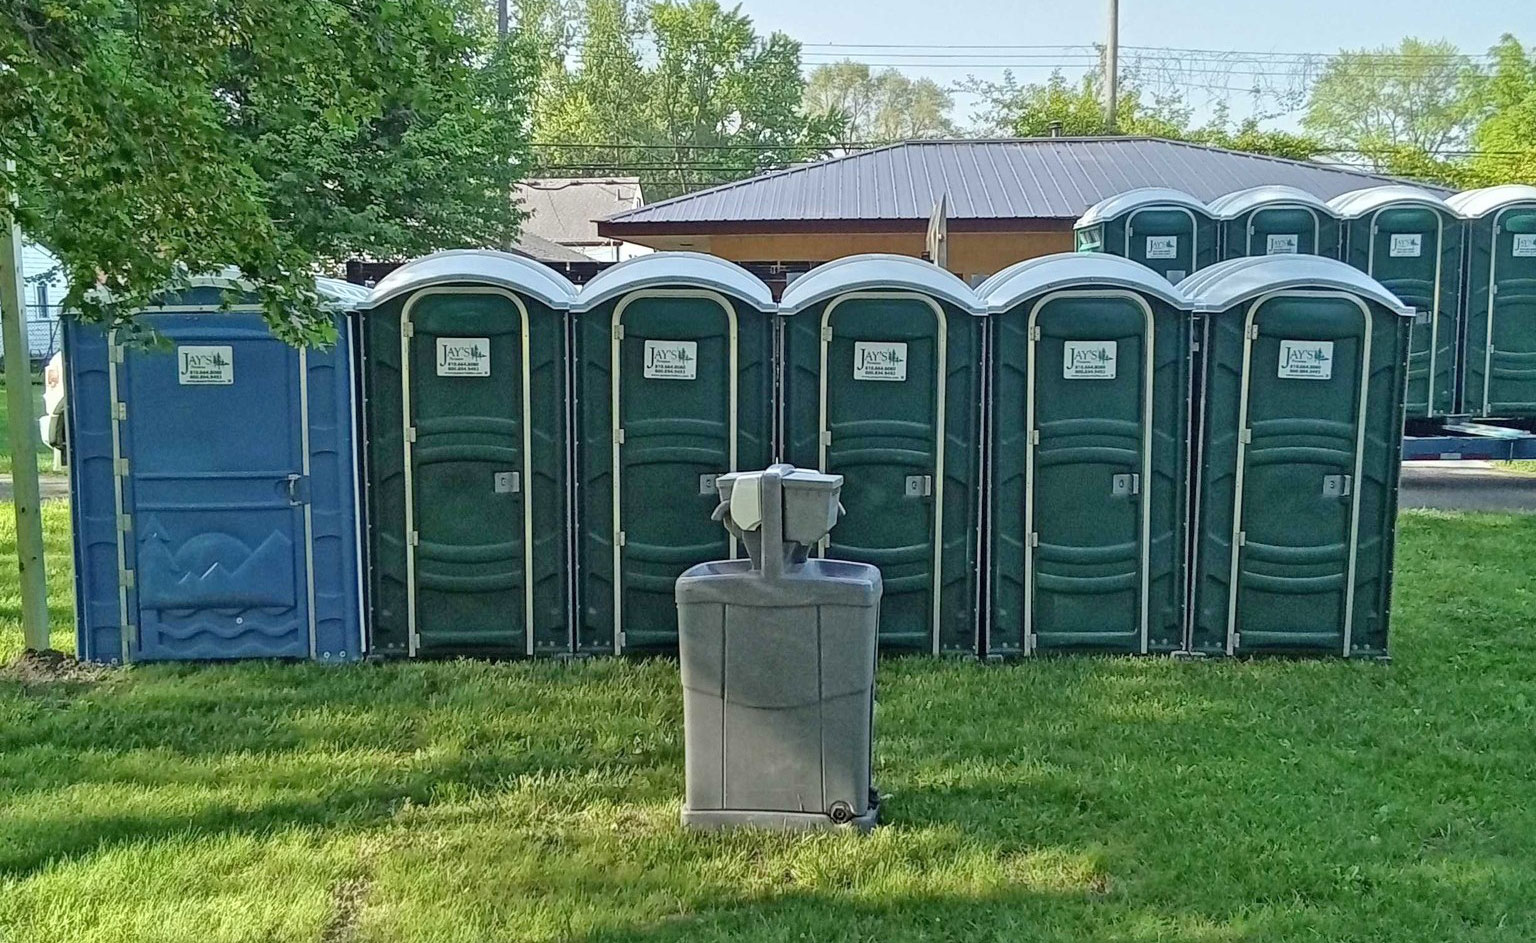 Standard & Handicap Accessible Portable Toilets for Center Line Independence Festival